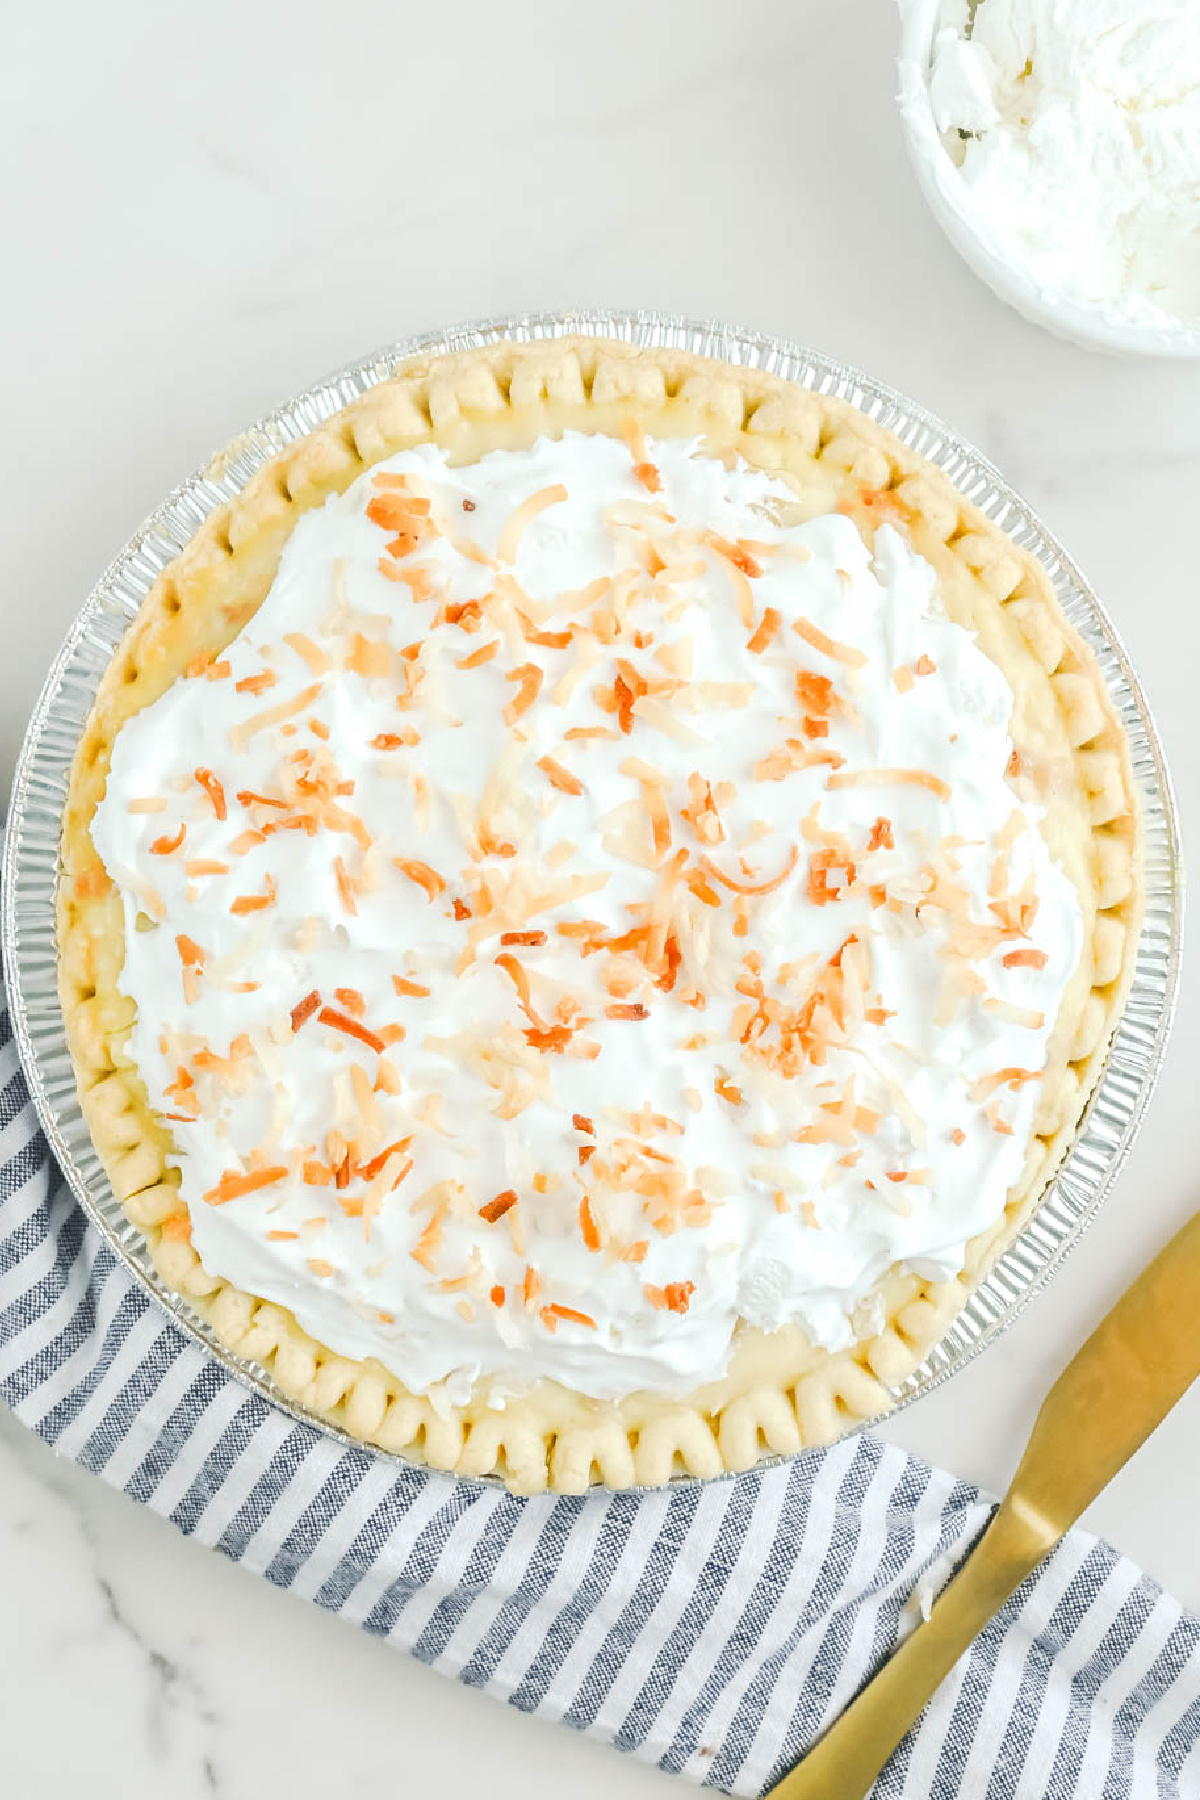 A coconut pie with whipped cream on top.